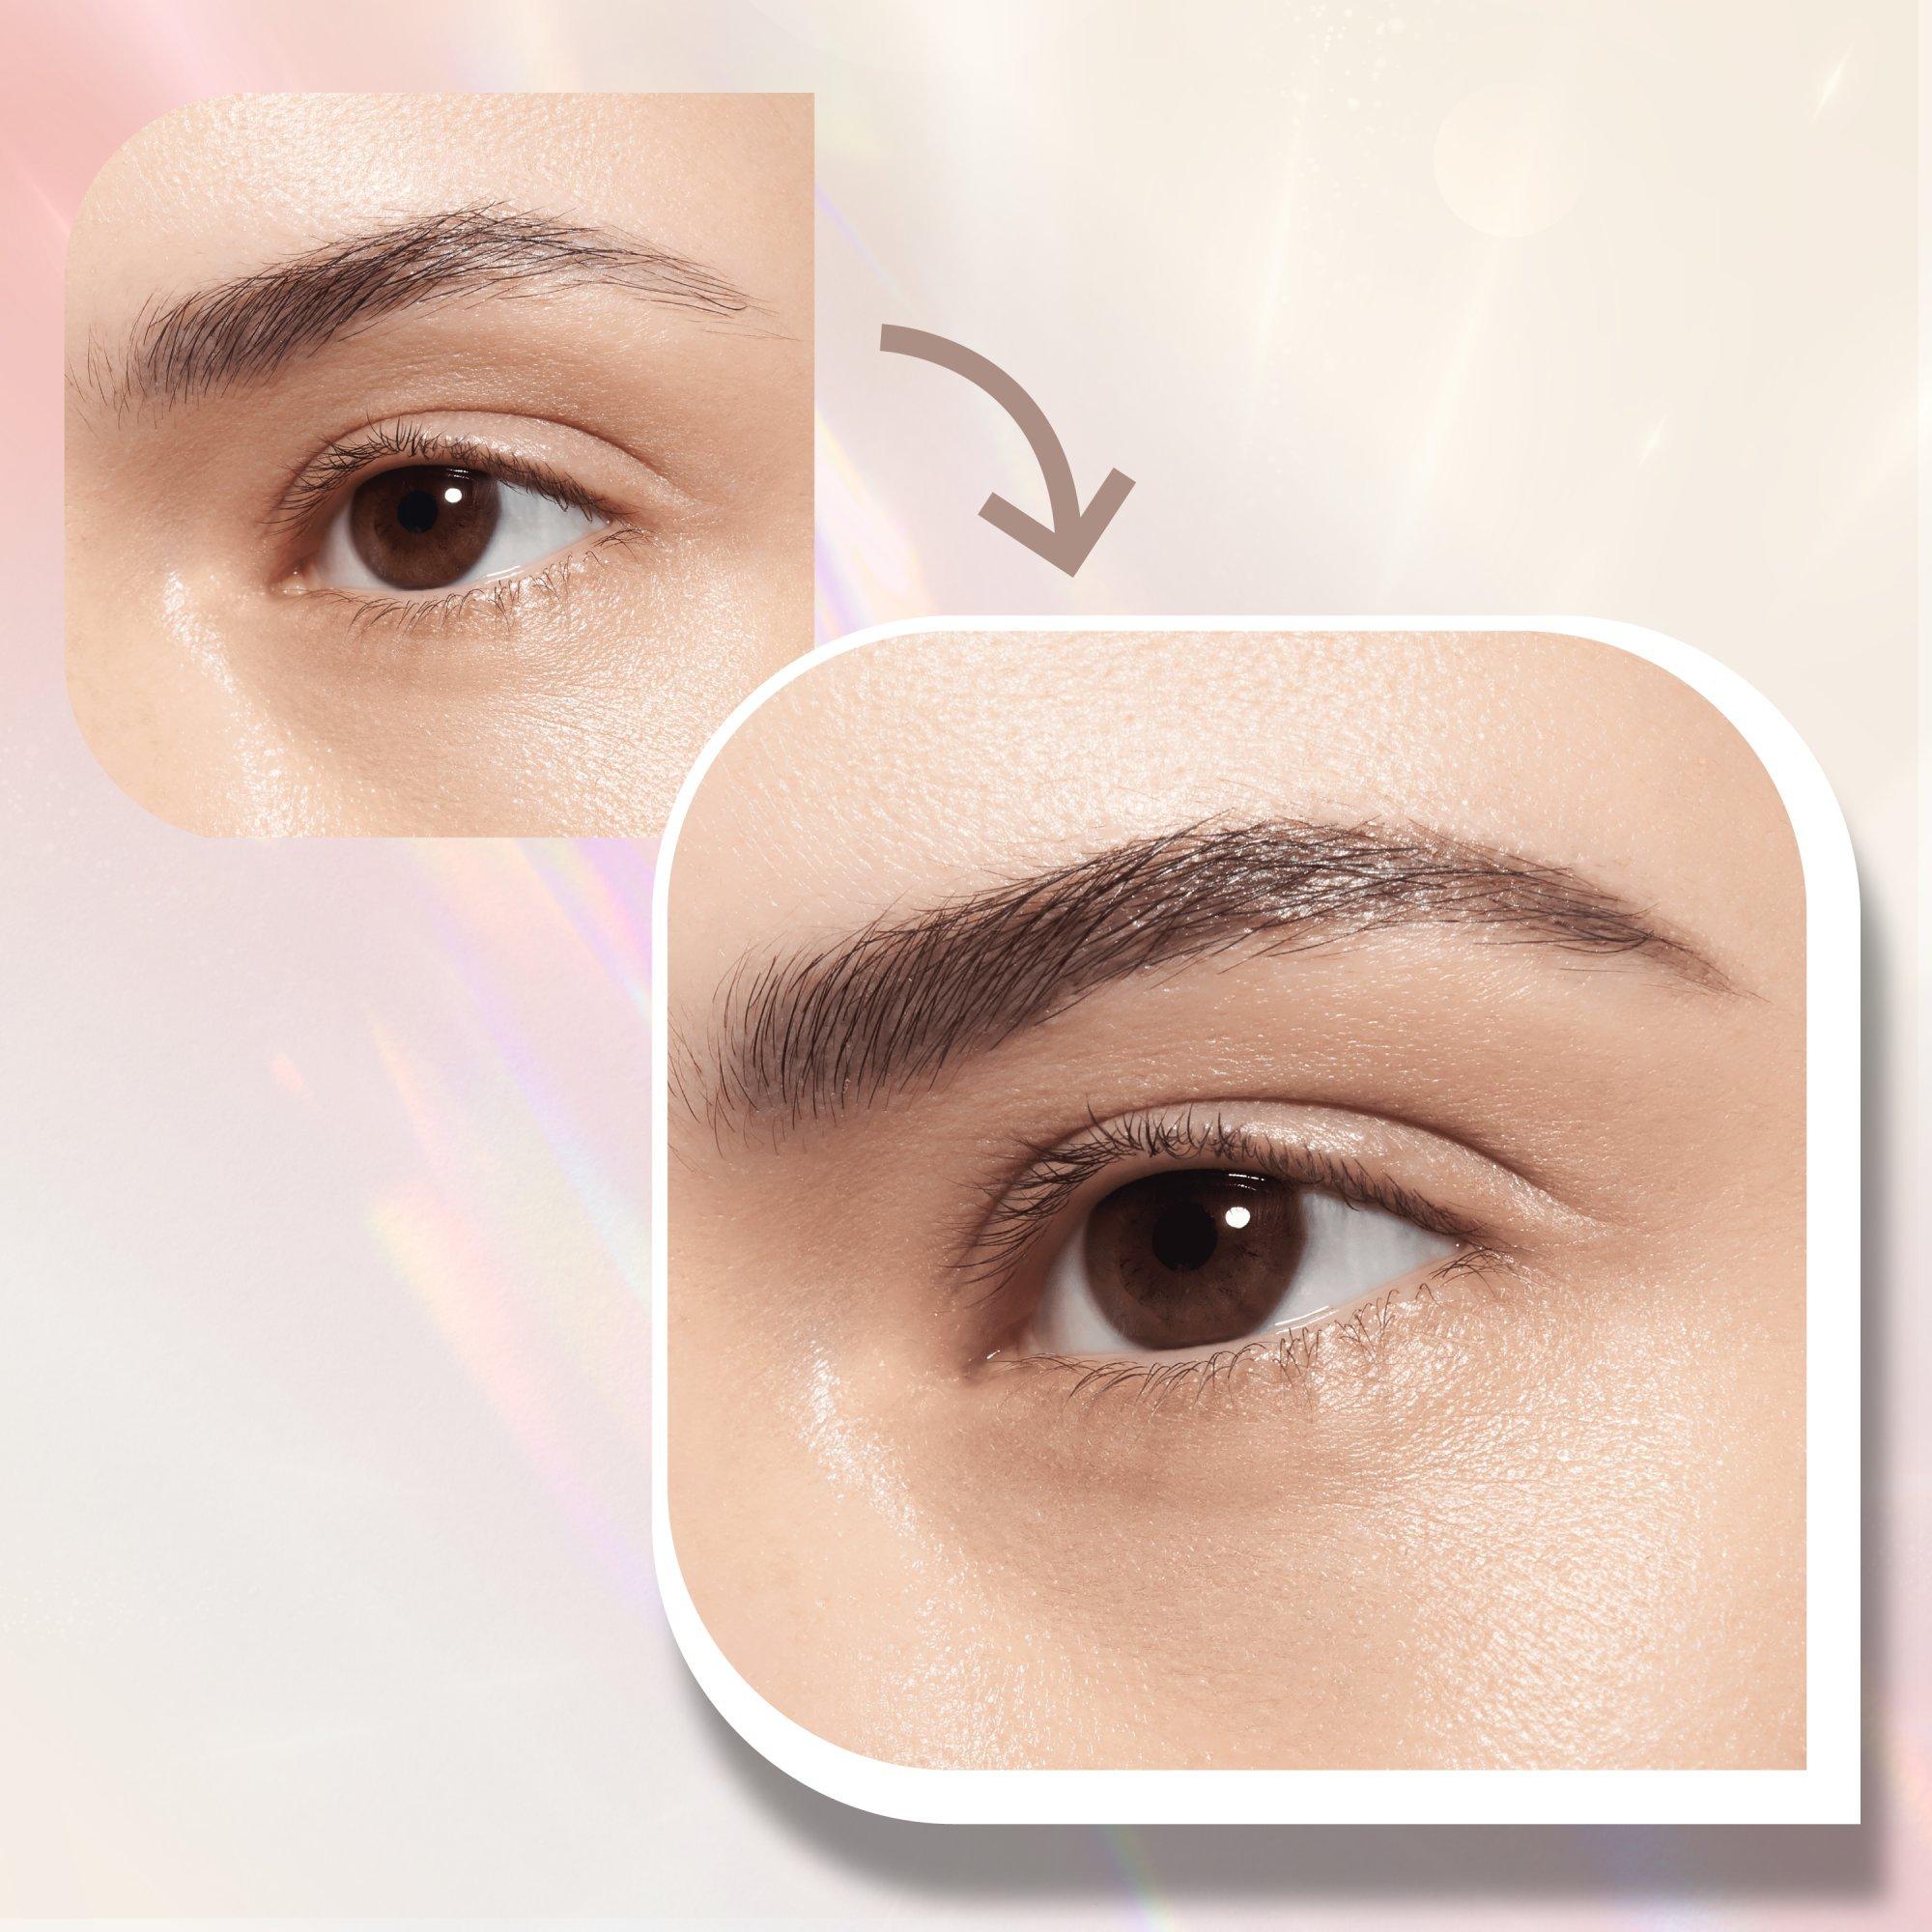 Pisak do brwi All In One Brow Perfector